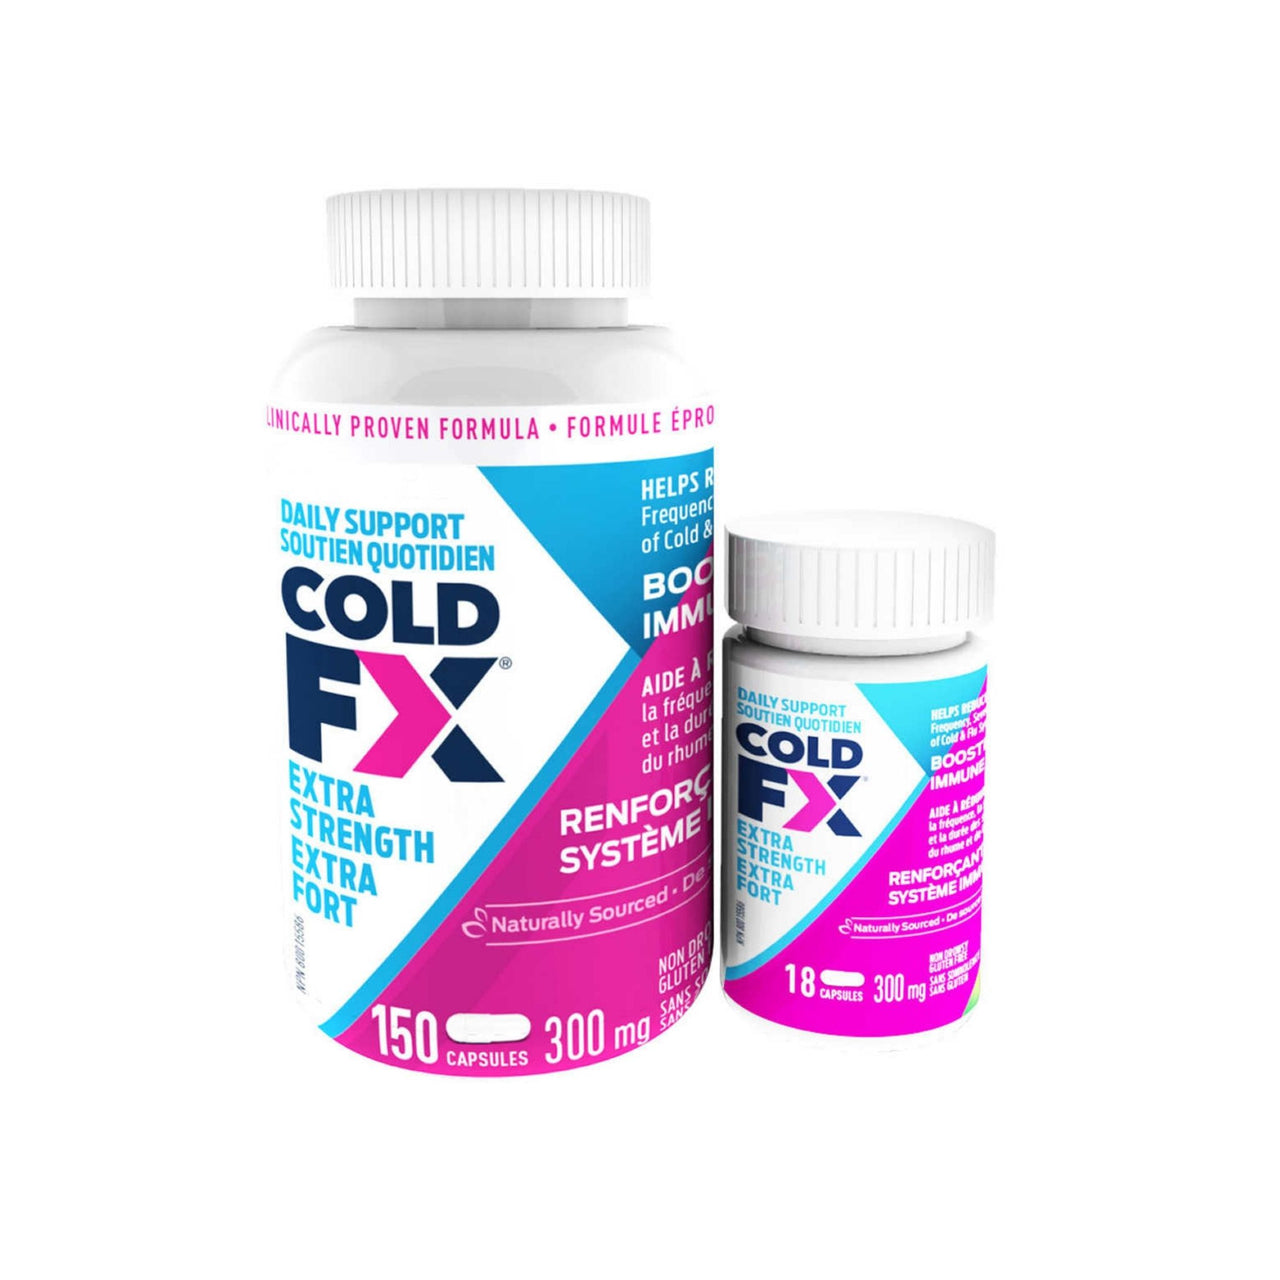 Image of COLD-FX Extra Strength, 300 mg,150 + 18 capsules - 1 x 0 Grams